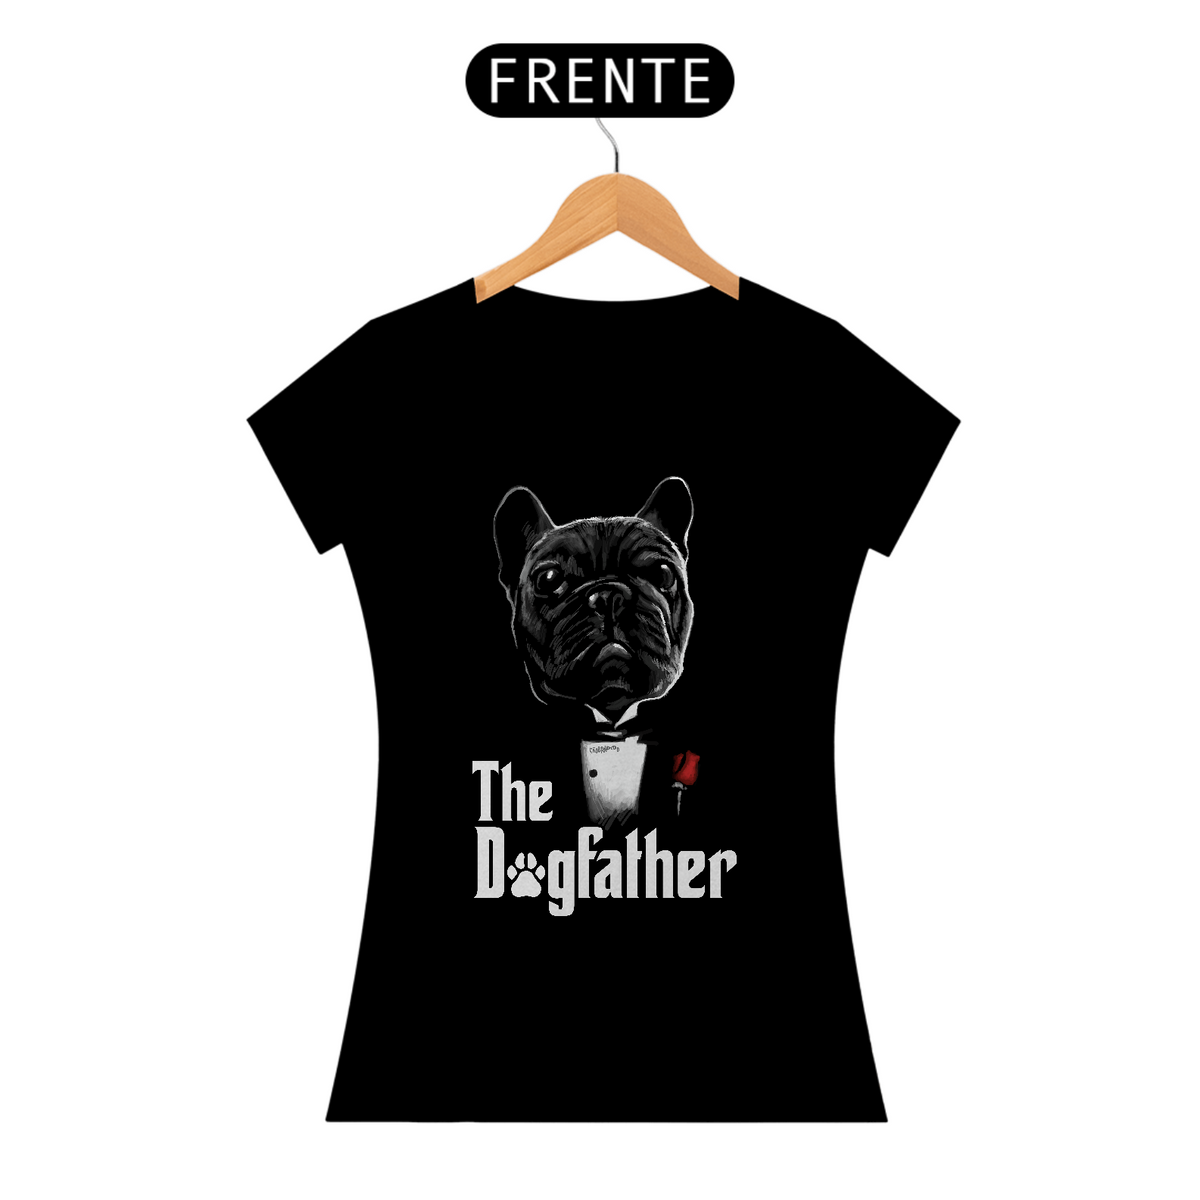 Nome do produto: Baby Look The Dogfather